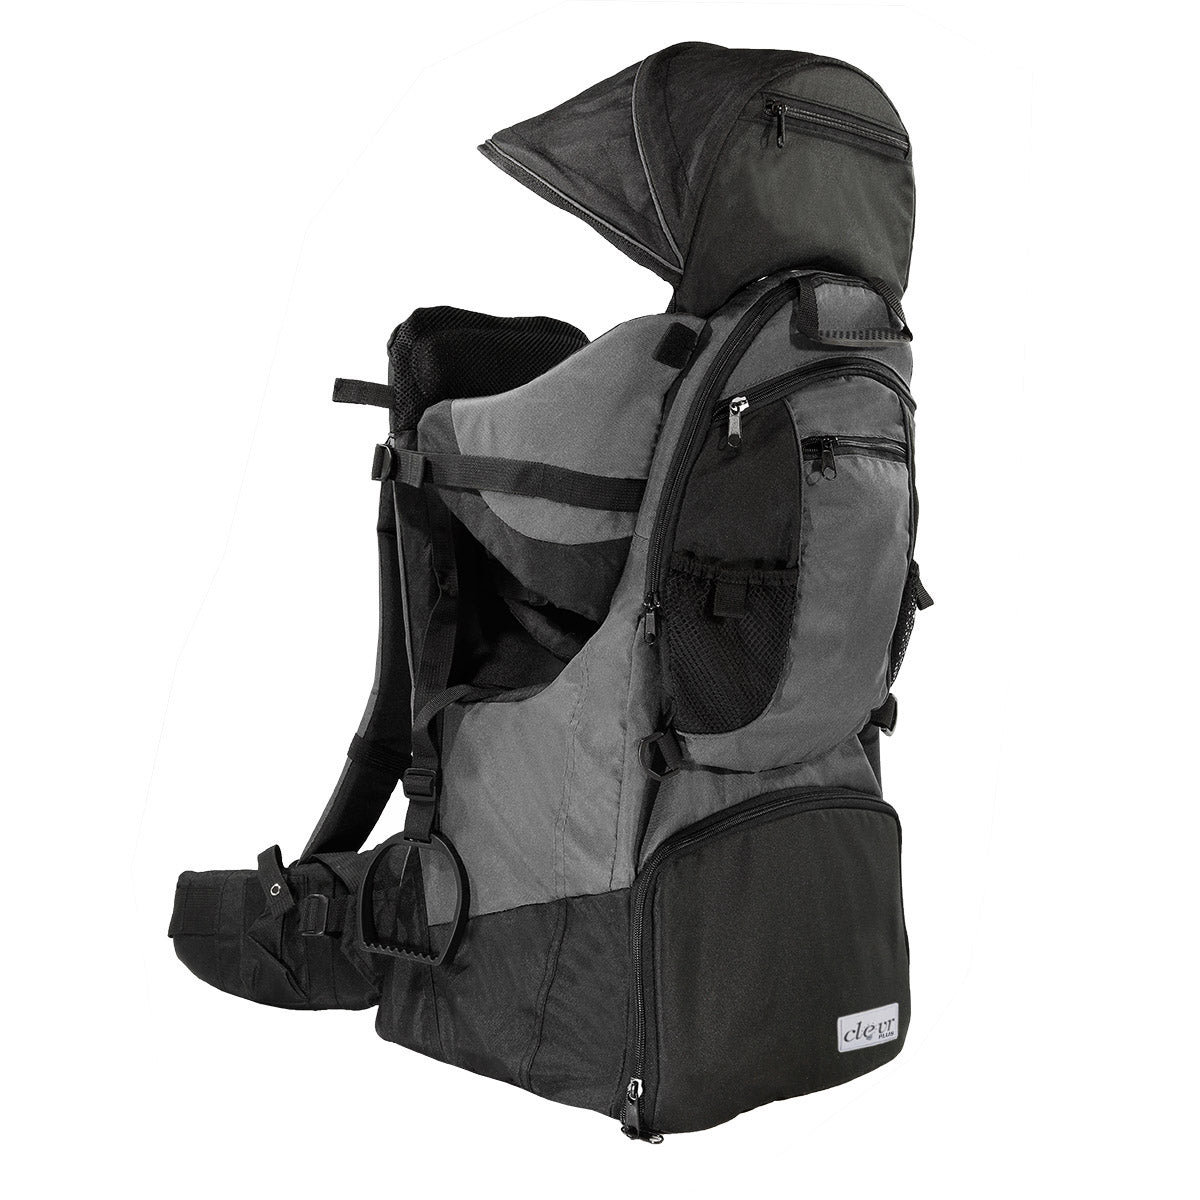 crosslinks clevr baby backpack carrier stand